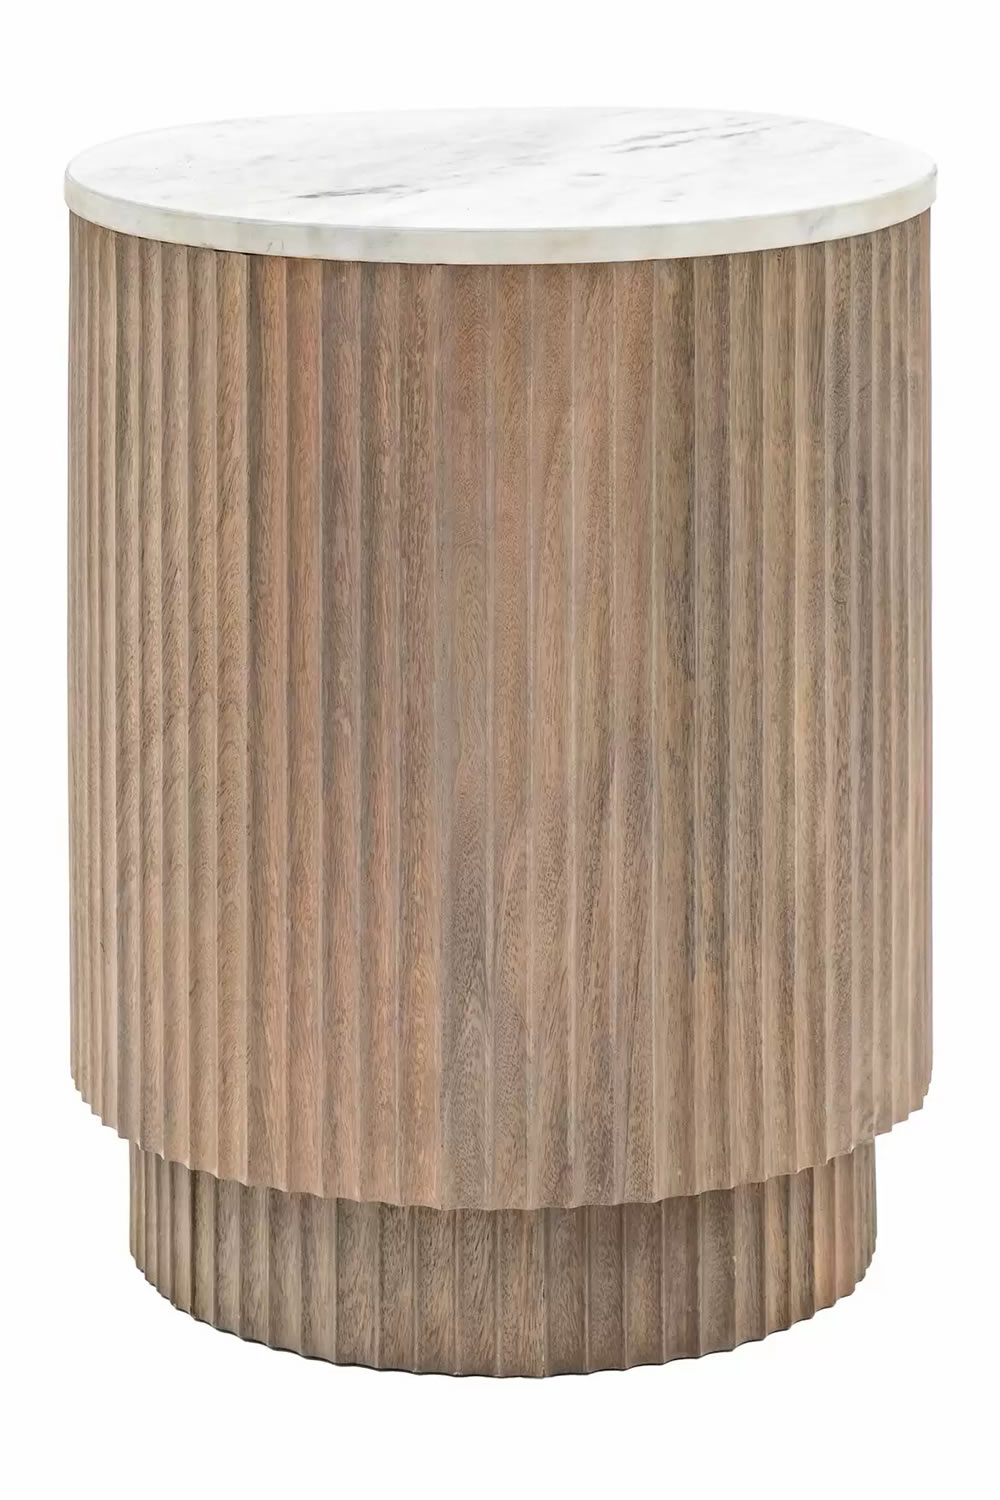 View Marmo Side table Crafted From Mango Wood Stylish Modern Design GreyBlue Veined White Carrera Marble Top Classy Ribbed Round Cylinder Base information